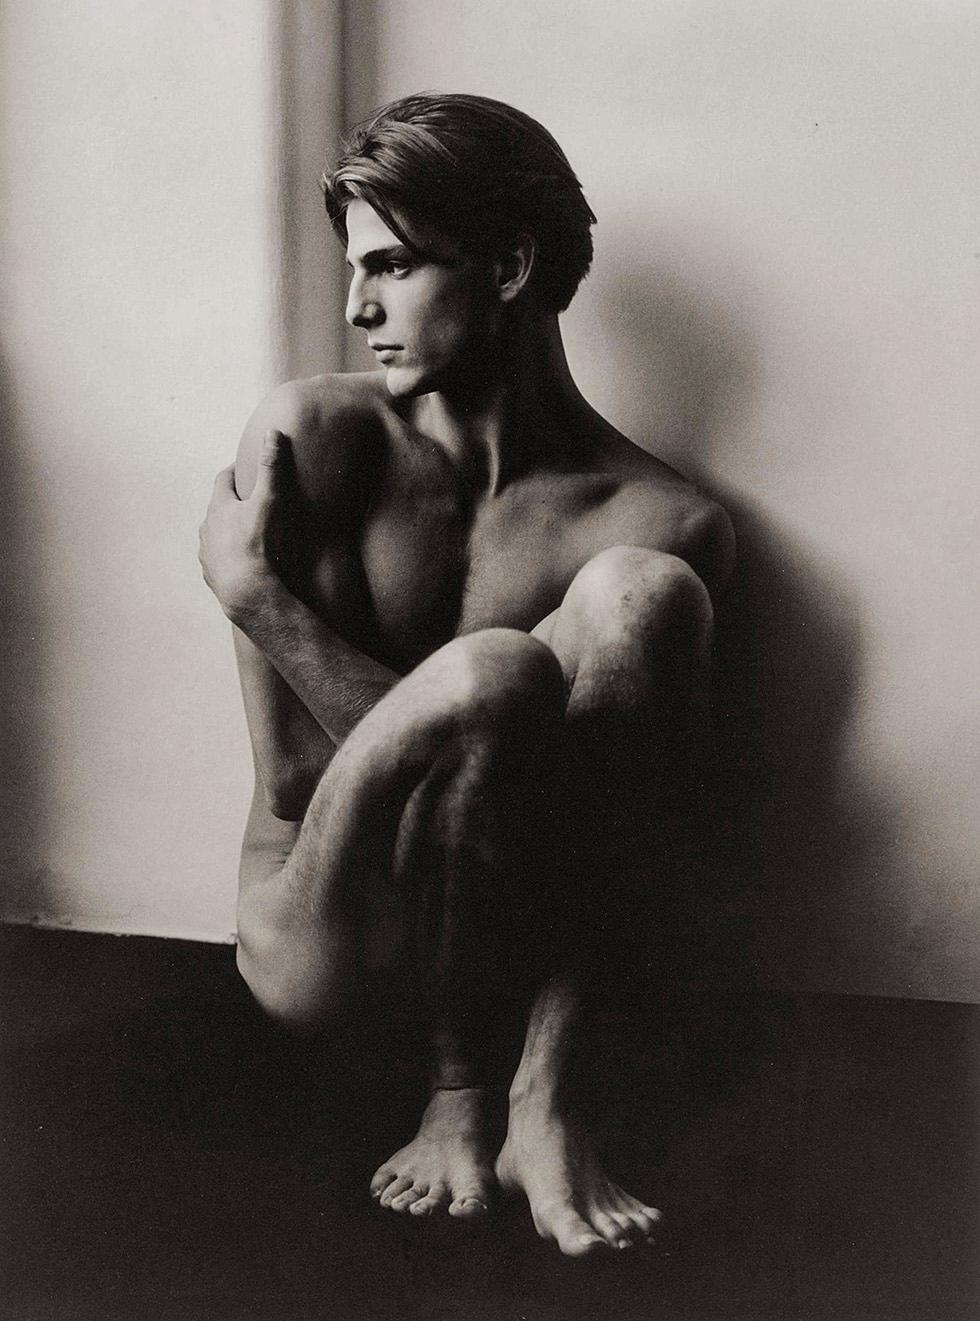 Stephano Seated, Milan - Photograph by Herb Ritts